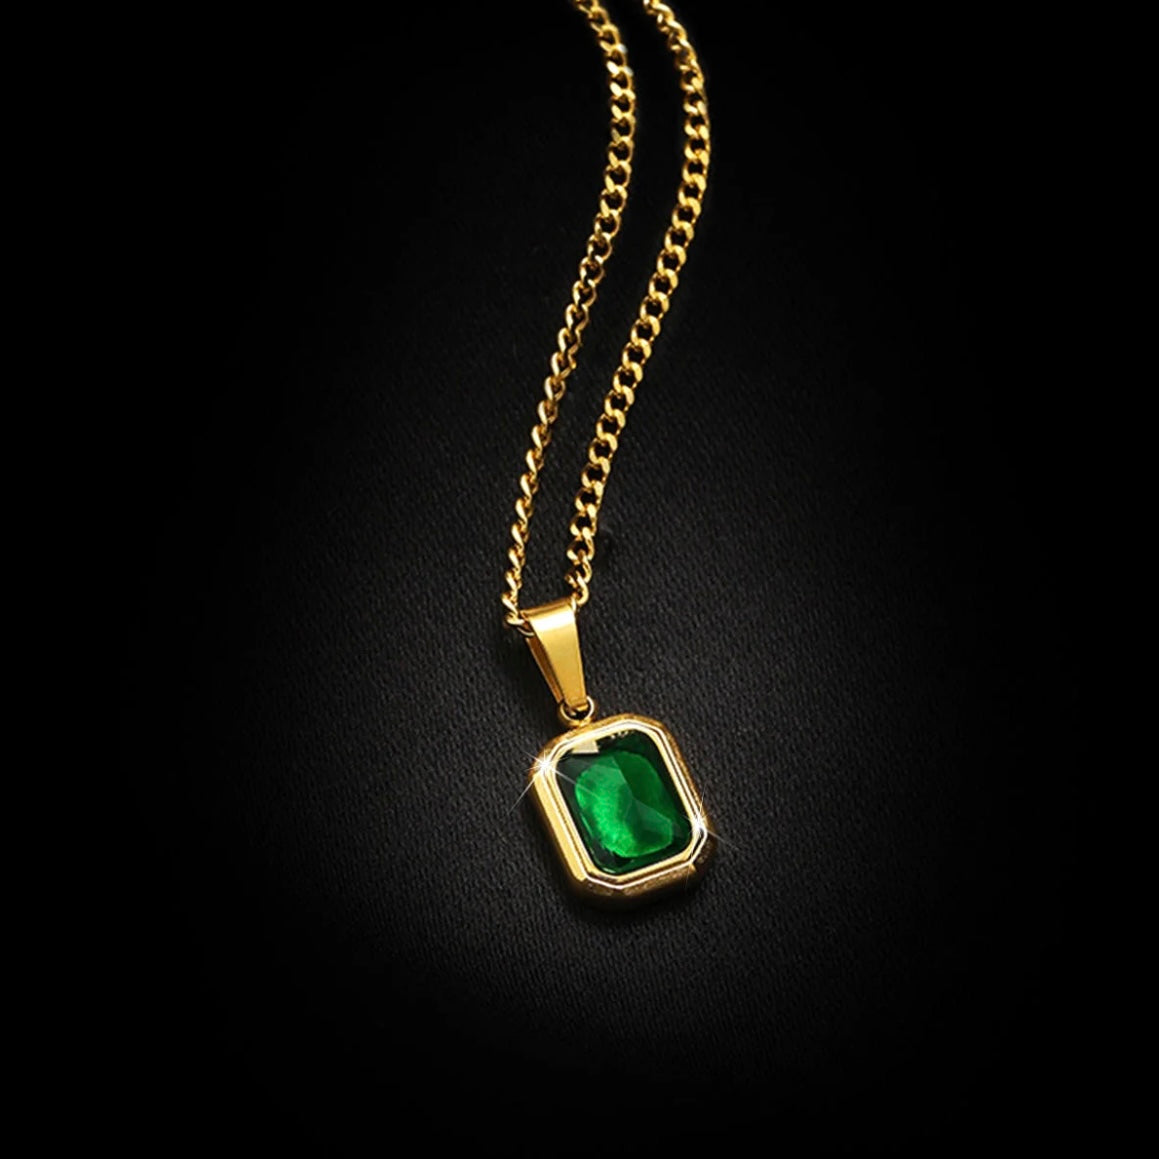 Green Serenity Necklace